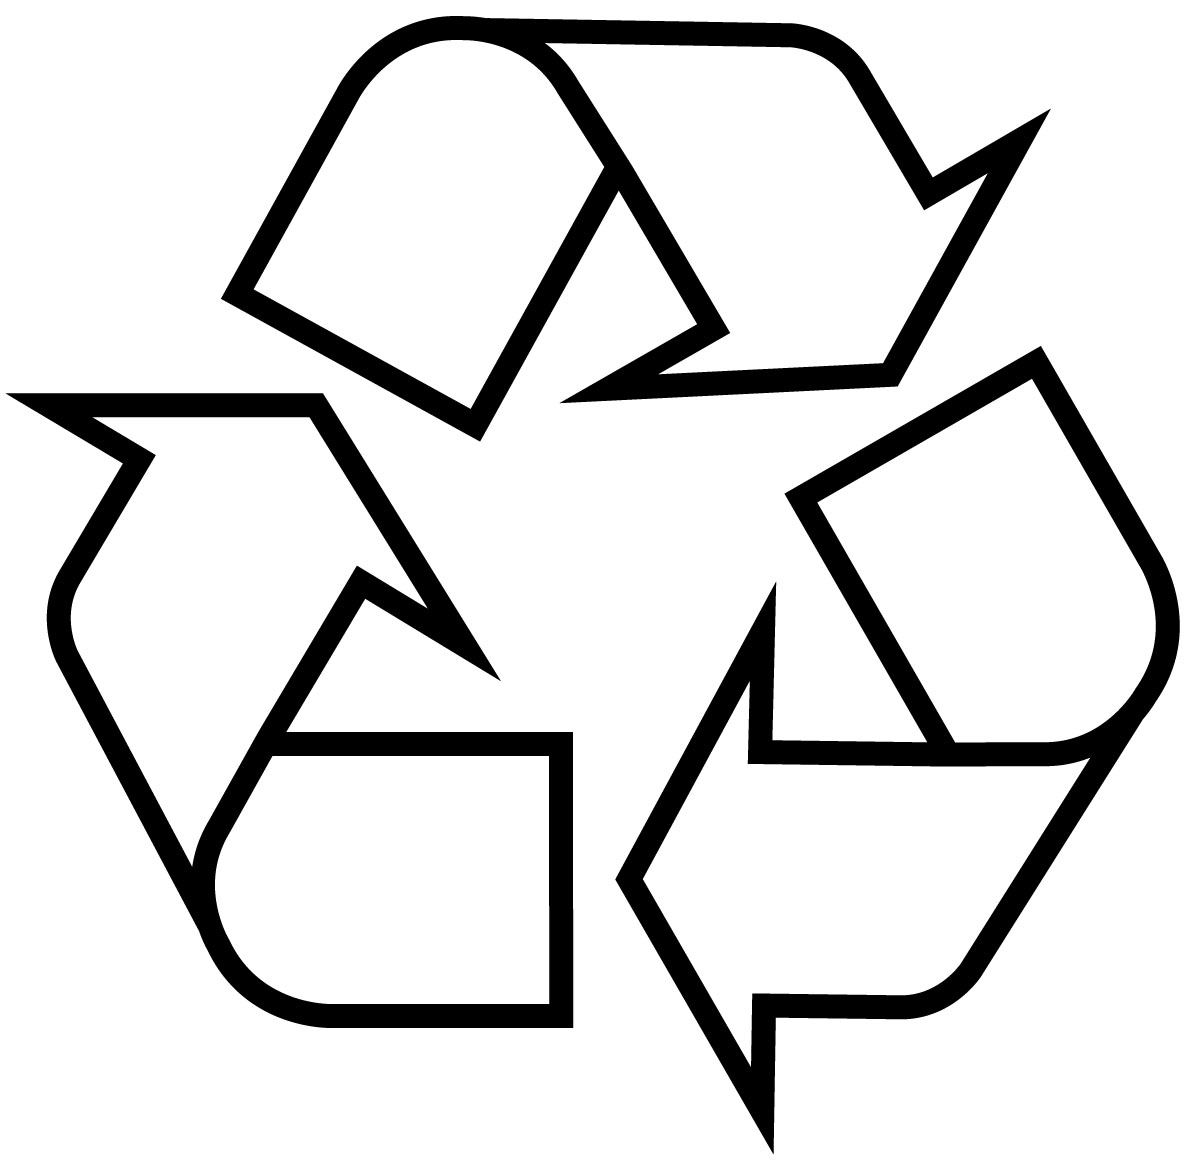 Picture Of Recycling Symbol - ClipArt Best